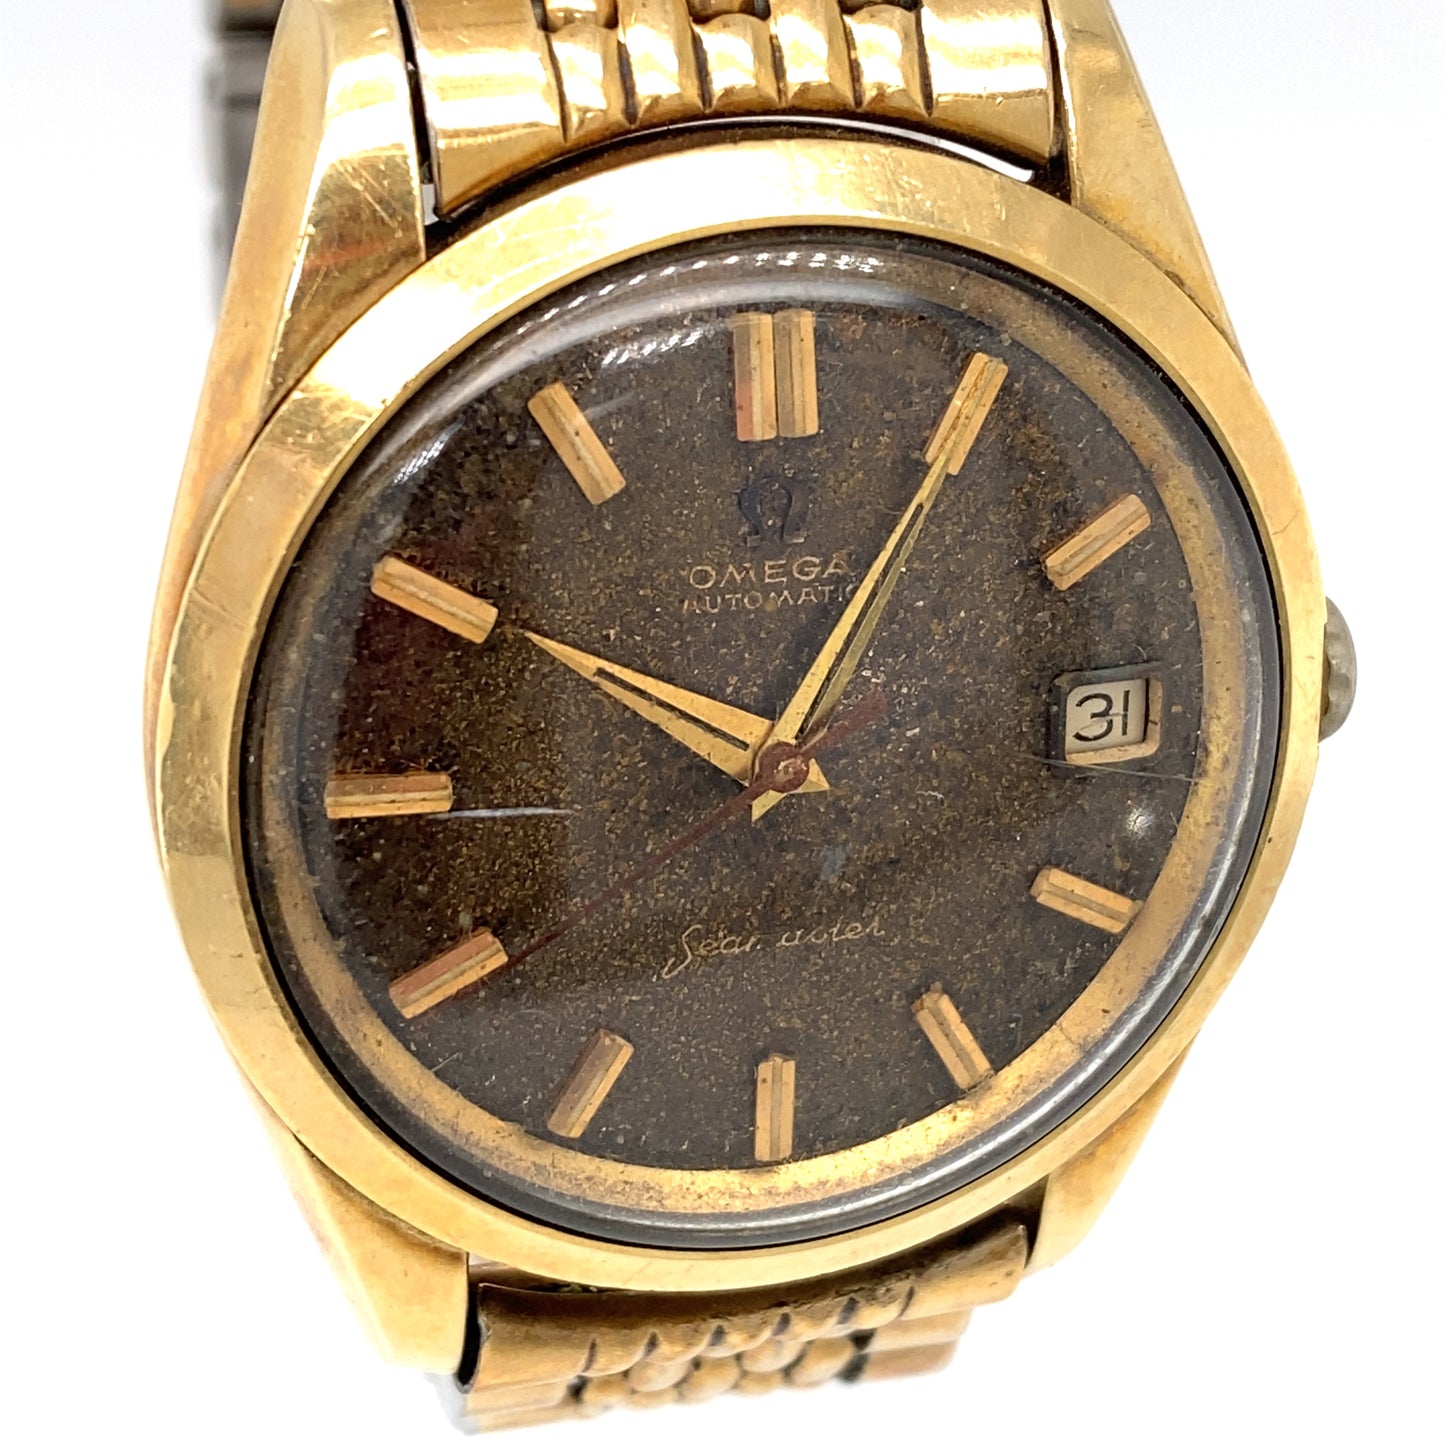 Circa 1960s Omega Seamaster Gold Tone Calendar Wrist Watch with Stardust Dial